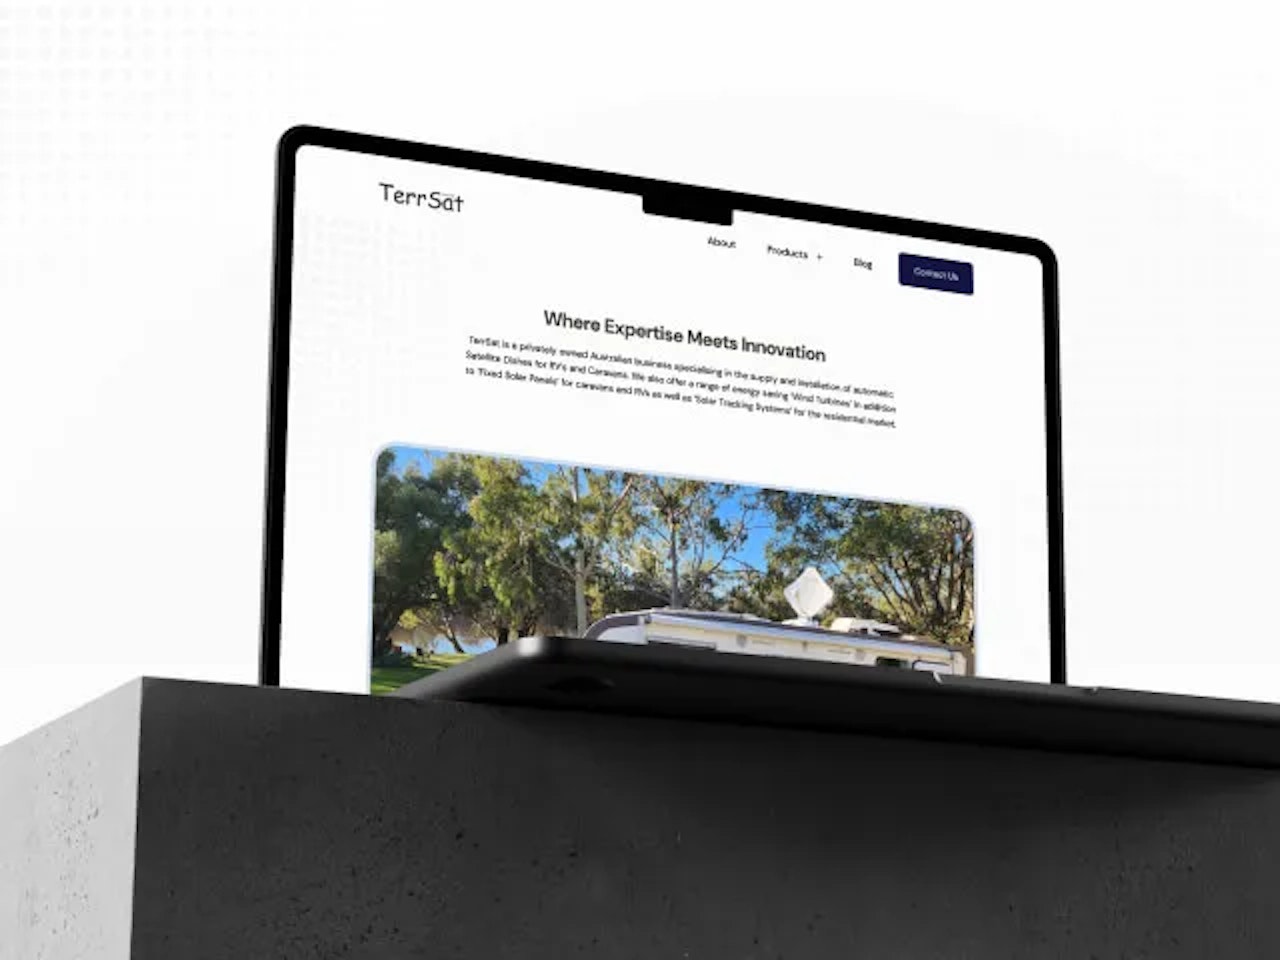 A photo of a laptop mockup with the TerrSat website featured inside of it.